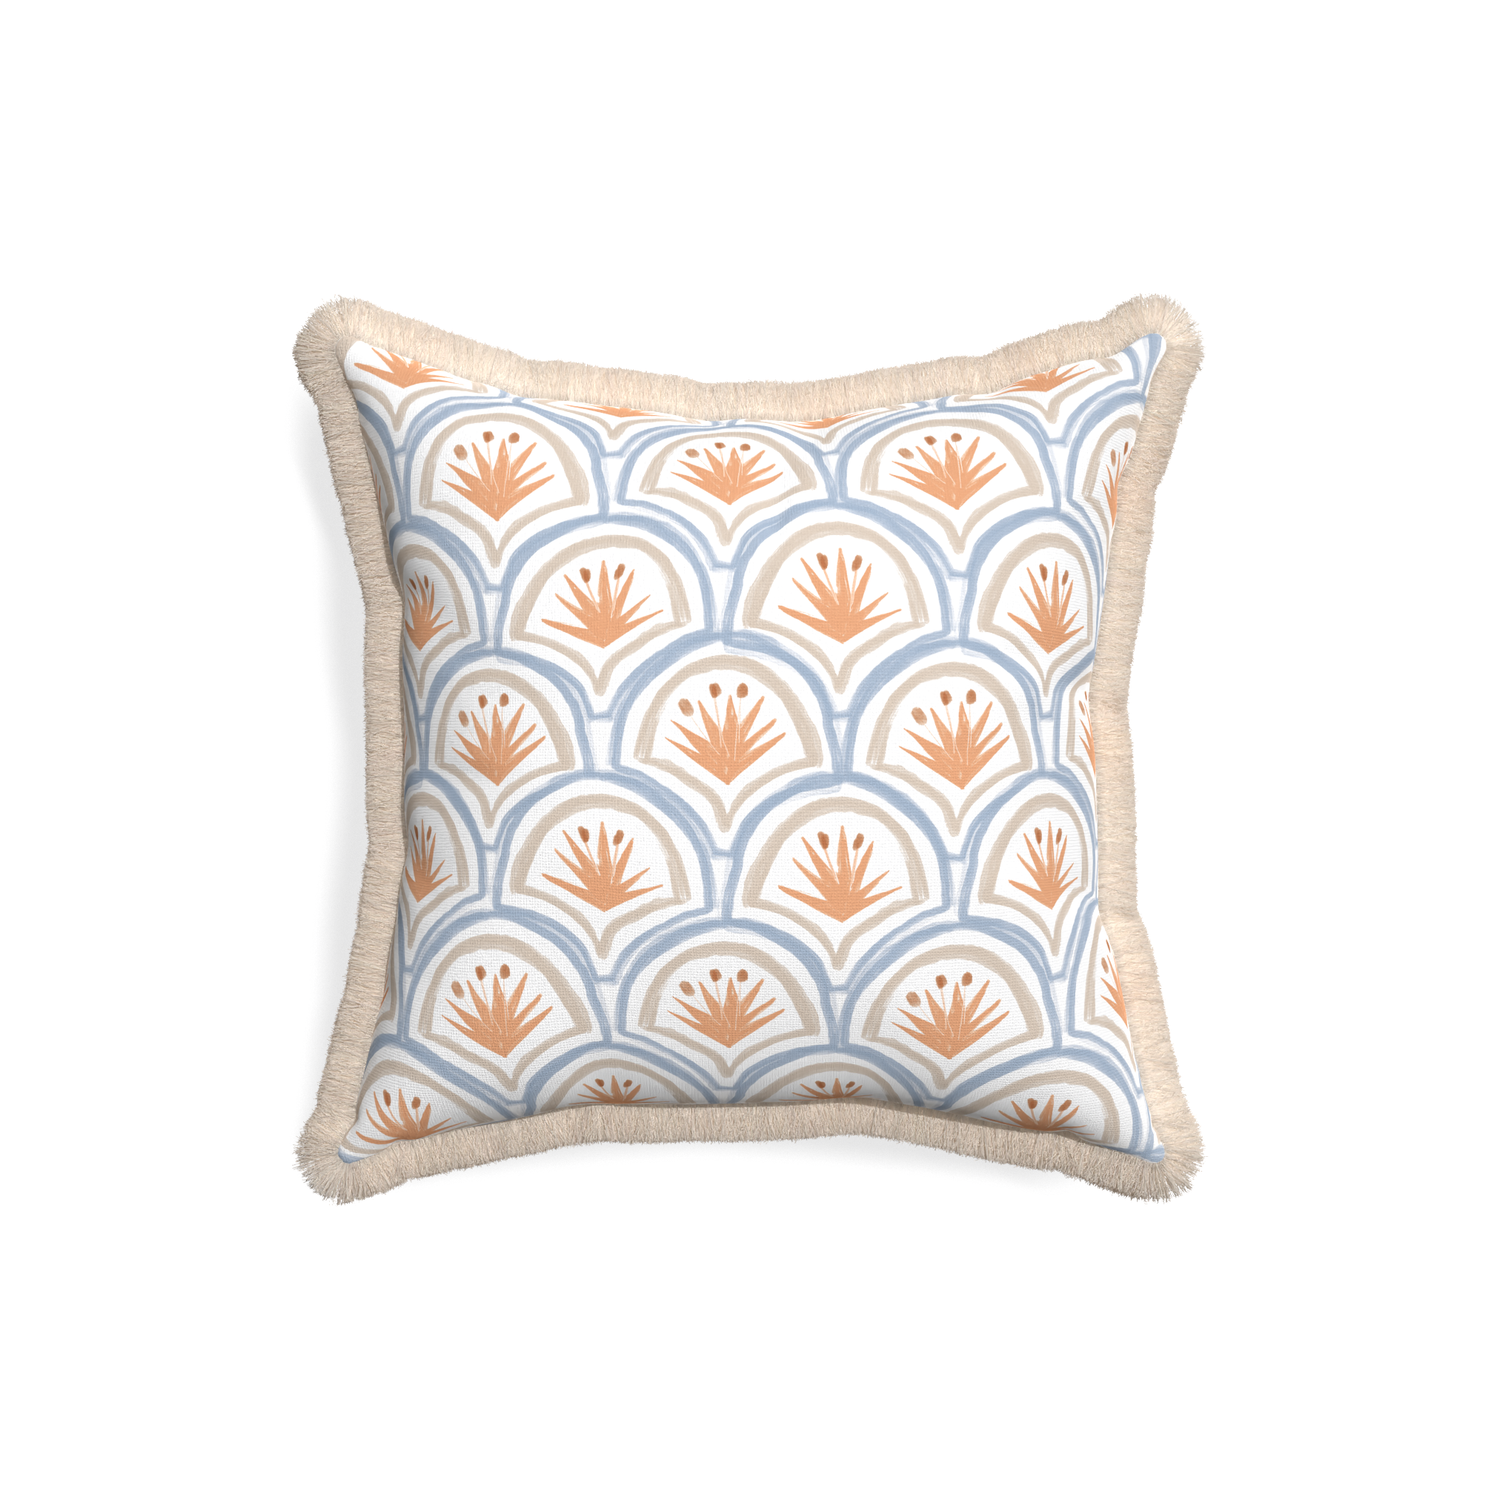 18-square thatcher apricot custom art deco palm patternpillow with cream fringe on white background